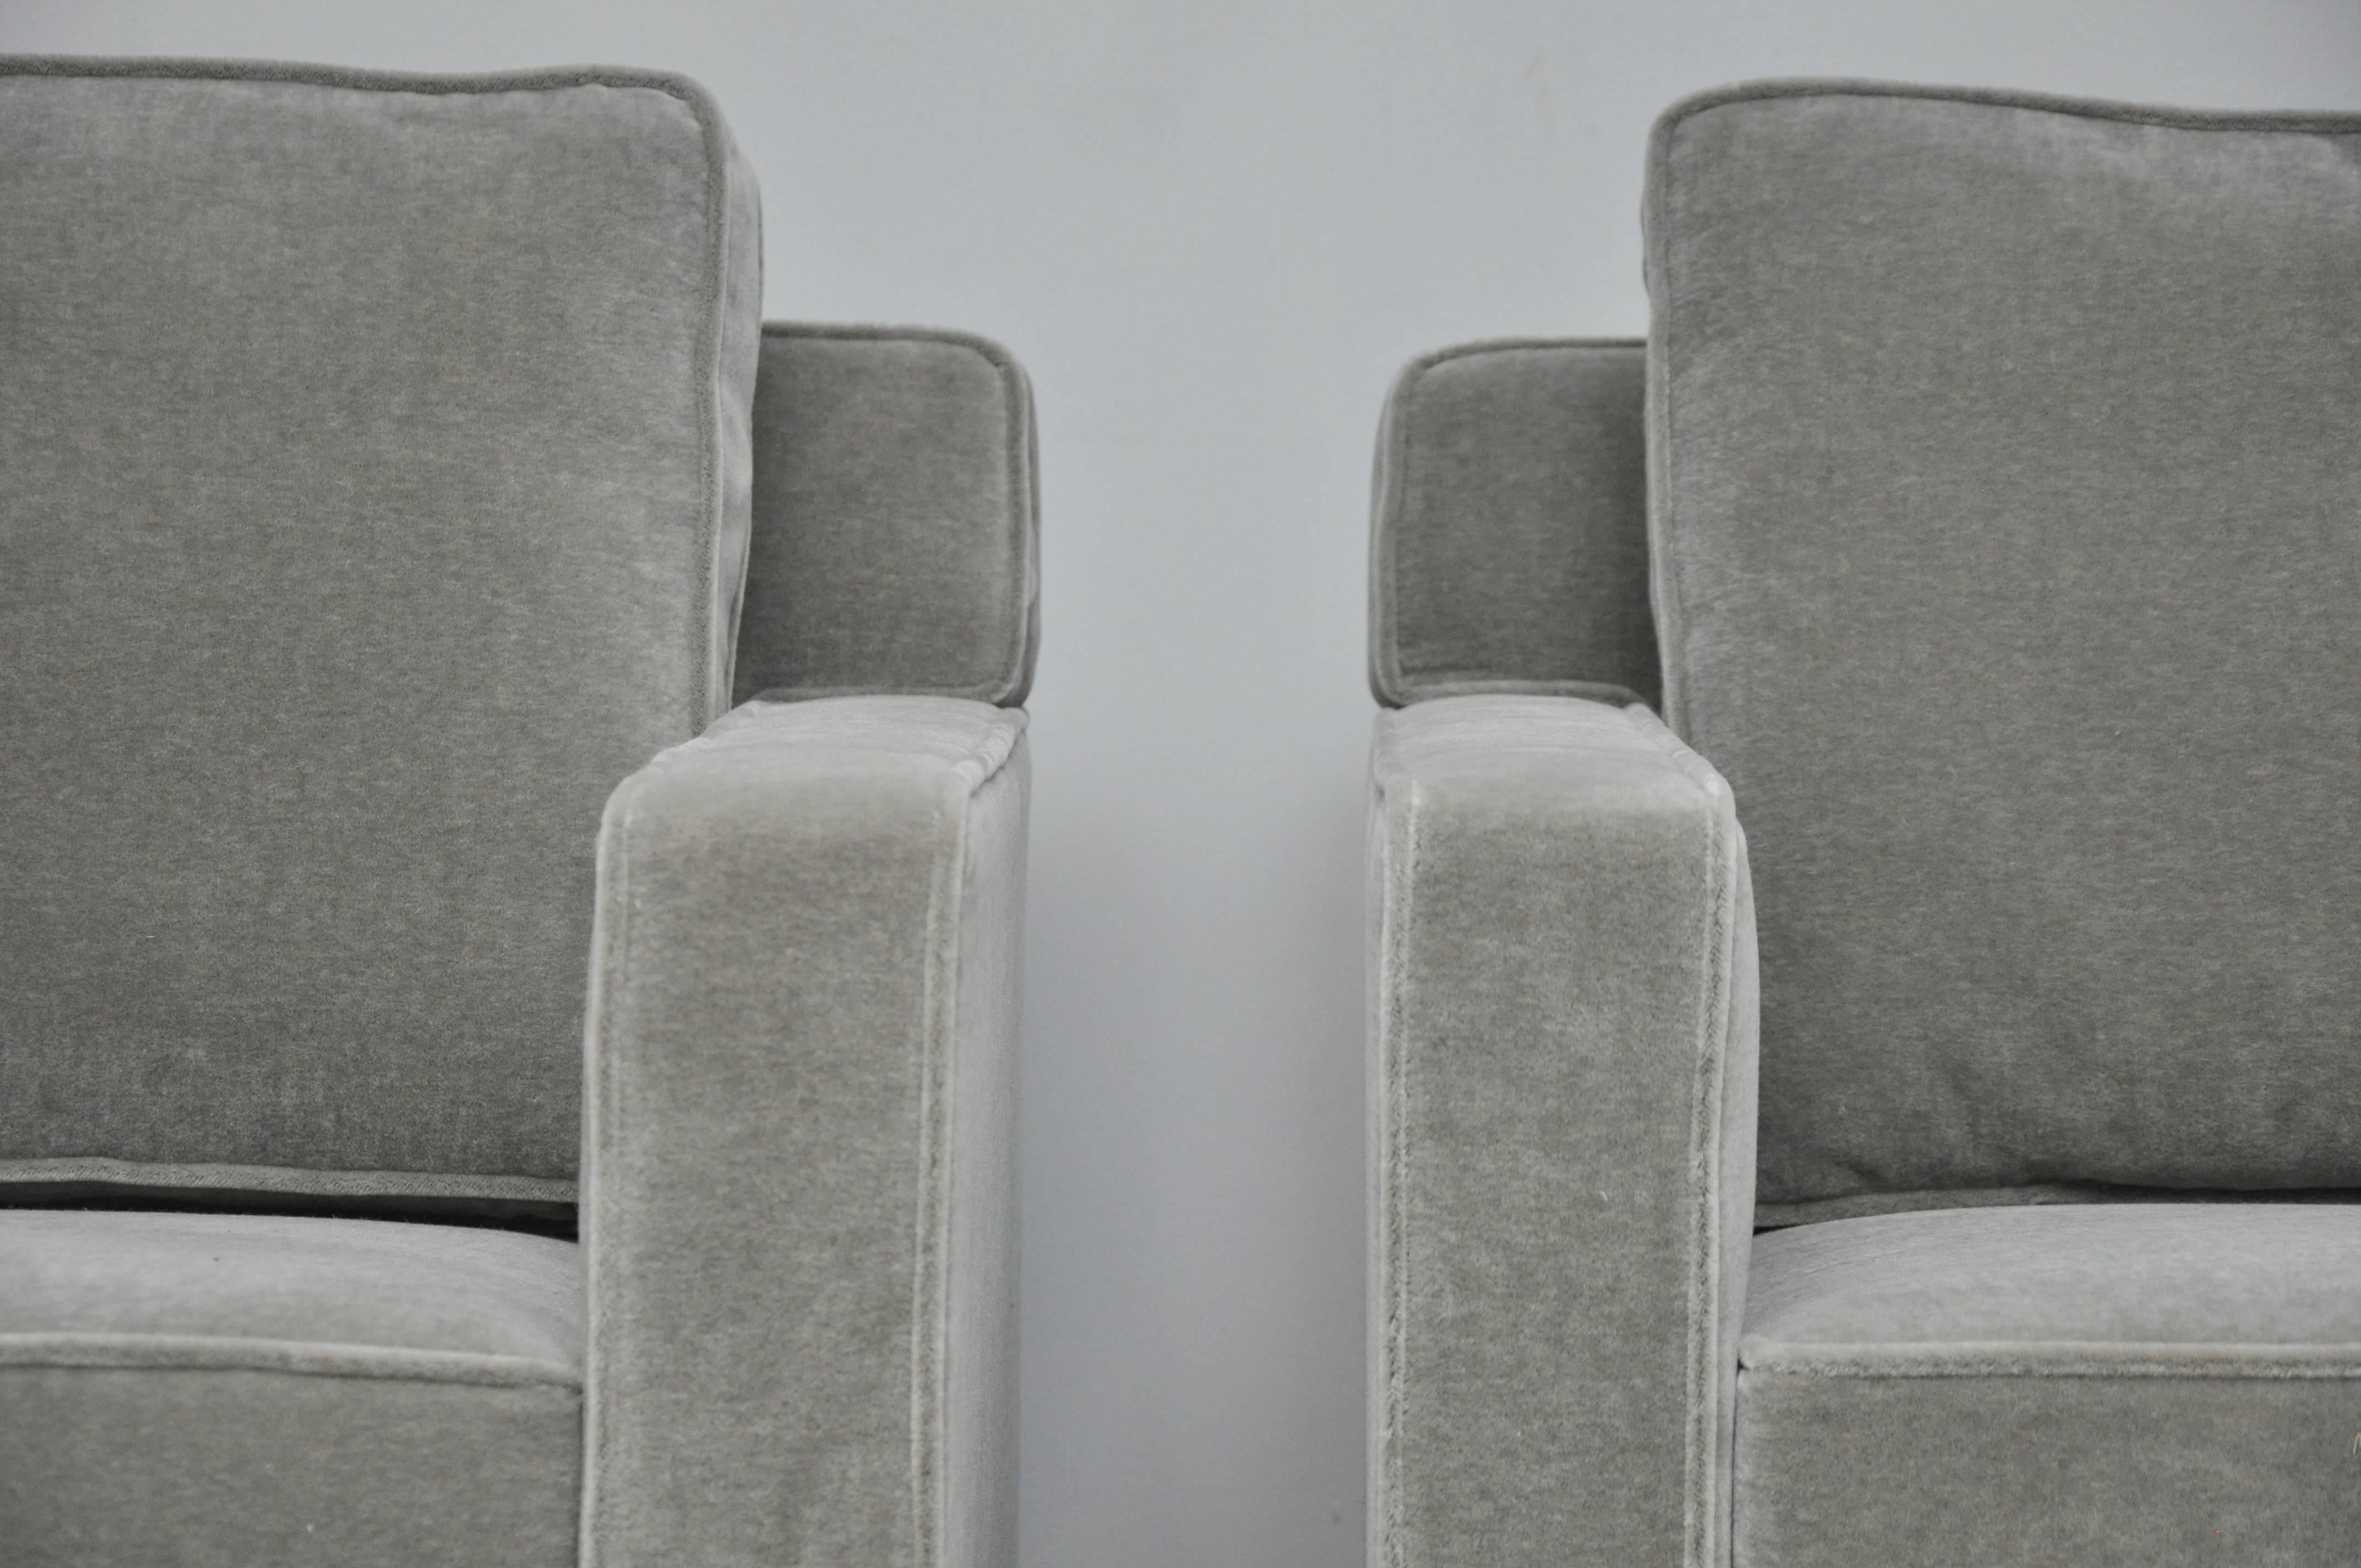 Pair of Lounge Chairs by Edward Wormley for Dunbar 1